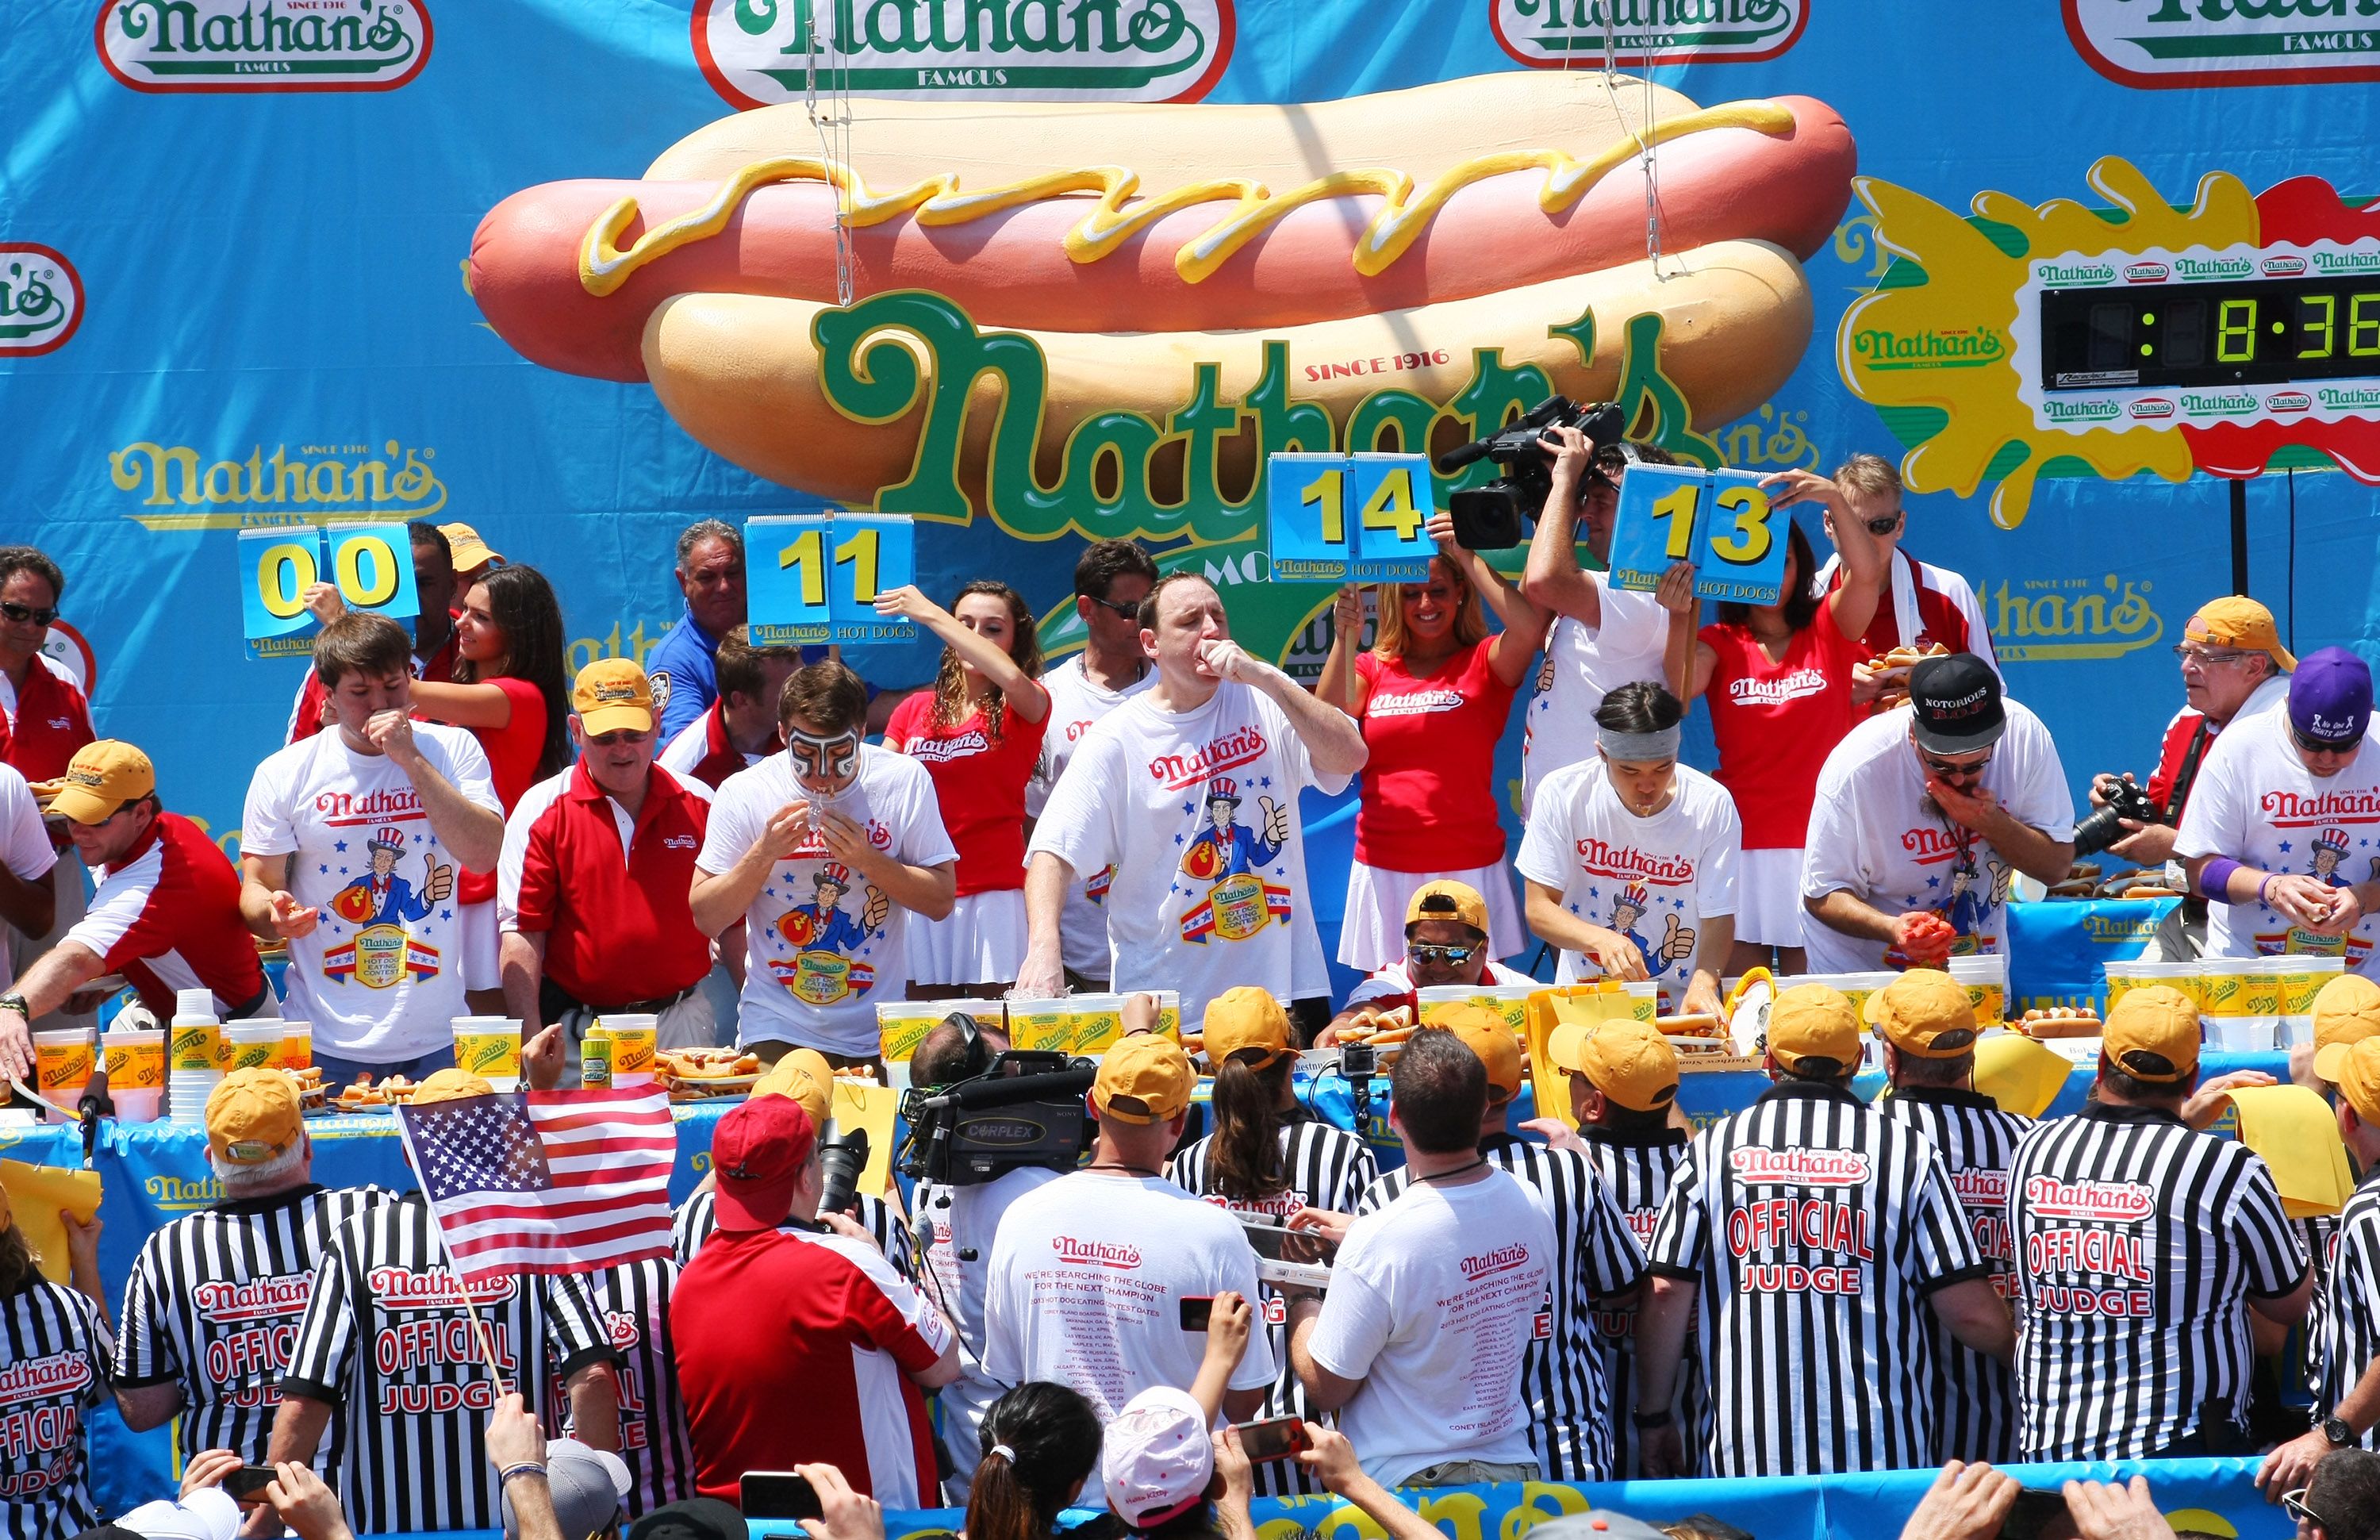 At Nathan's hot dog eating contest, there is only one star Selected News